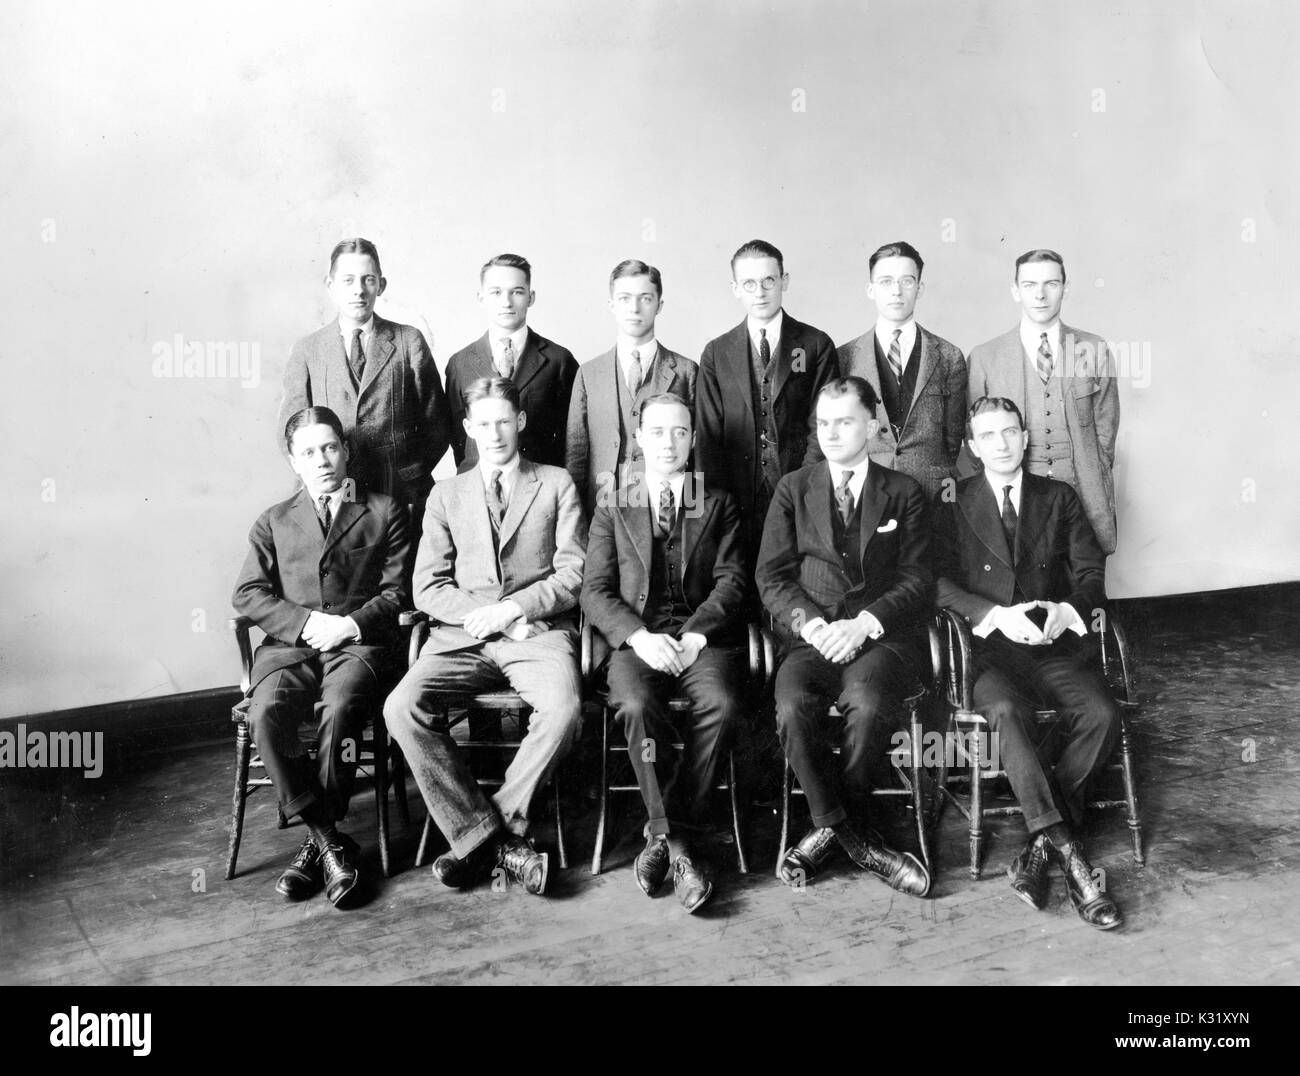 Sepia portrait photograph of members of the Christian Service Board at Johns Hopkins University, with five males seated with ankles crossed in the front row and six males standing behind with hands at sides, all wearing suits, Baltimore, Maryland, 1923. Stock Photo